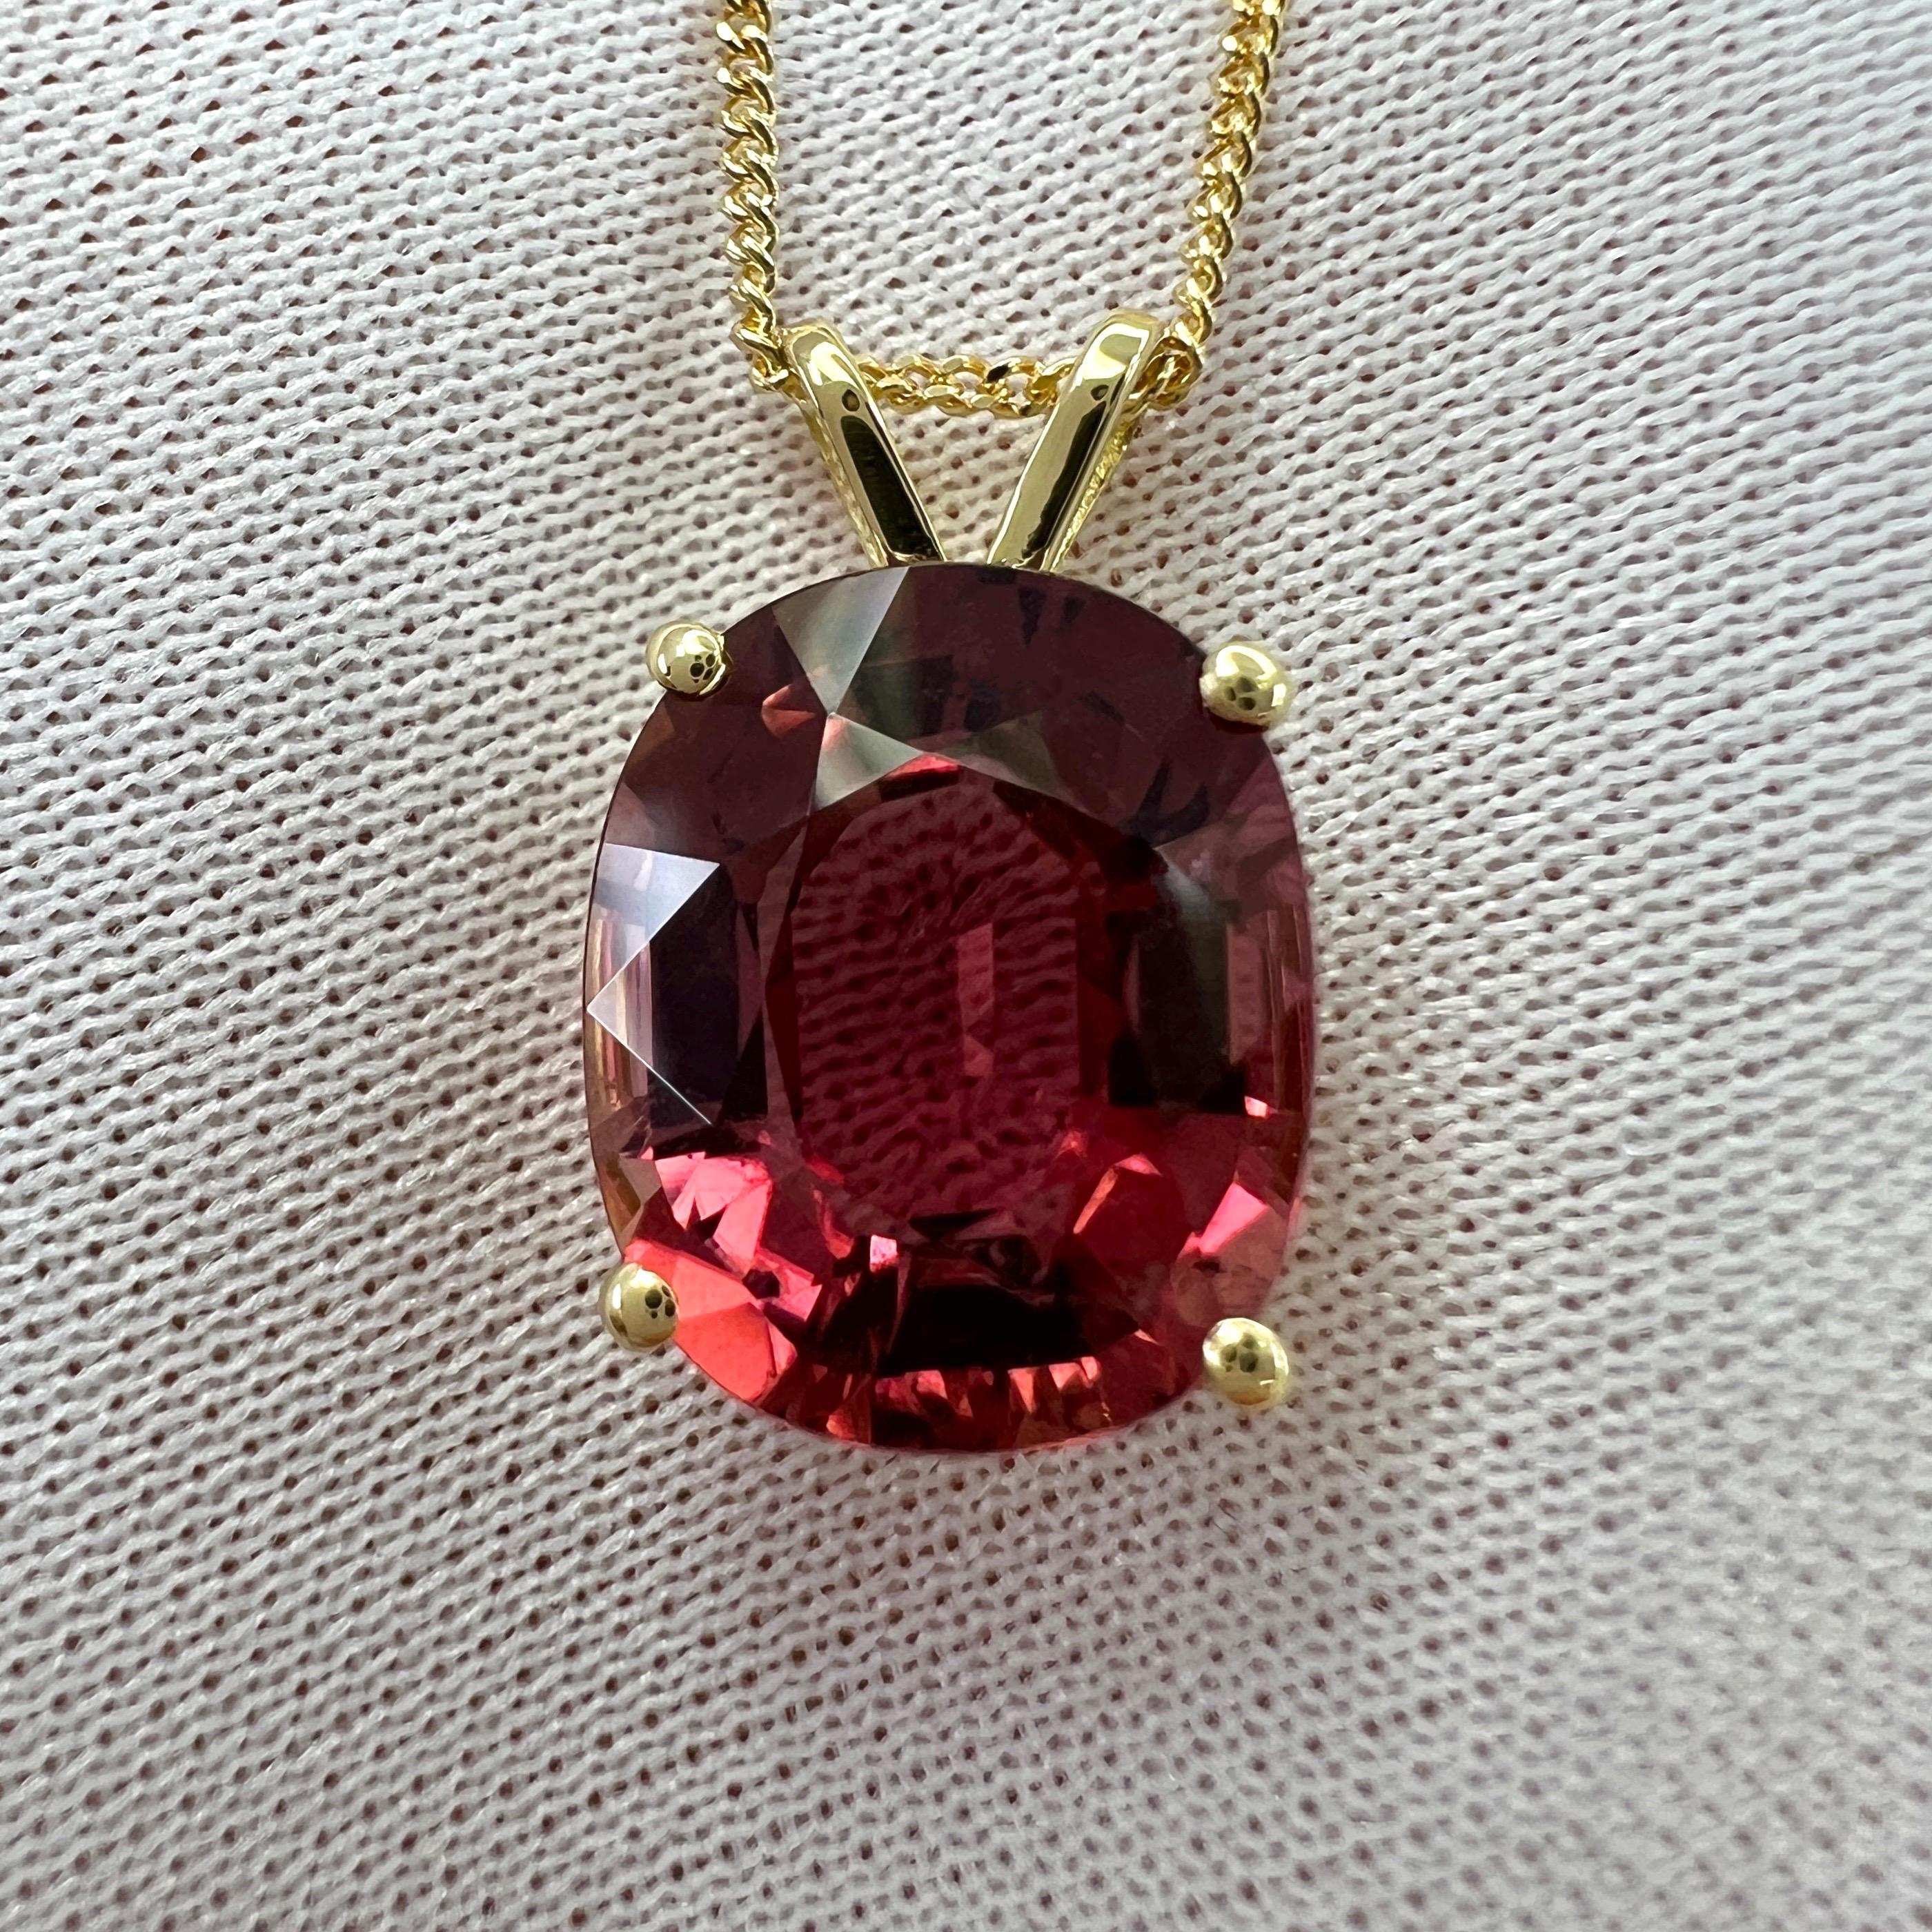 5.35ct Pink Orange Rubellite Tourmaline Oval 18k Yellow Gold Pendant Necklace For Sale 2